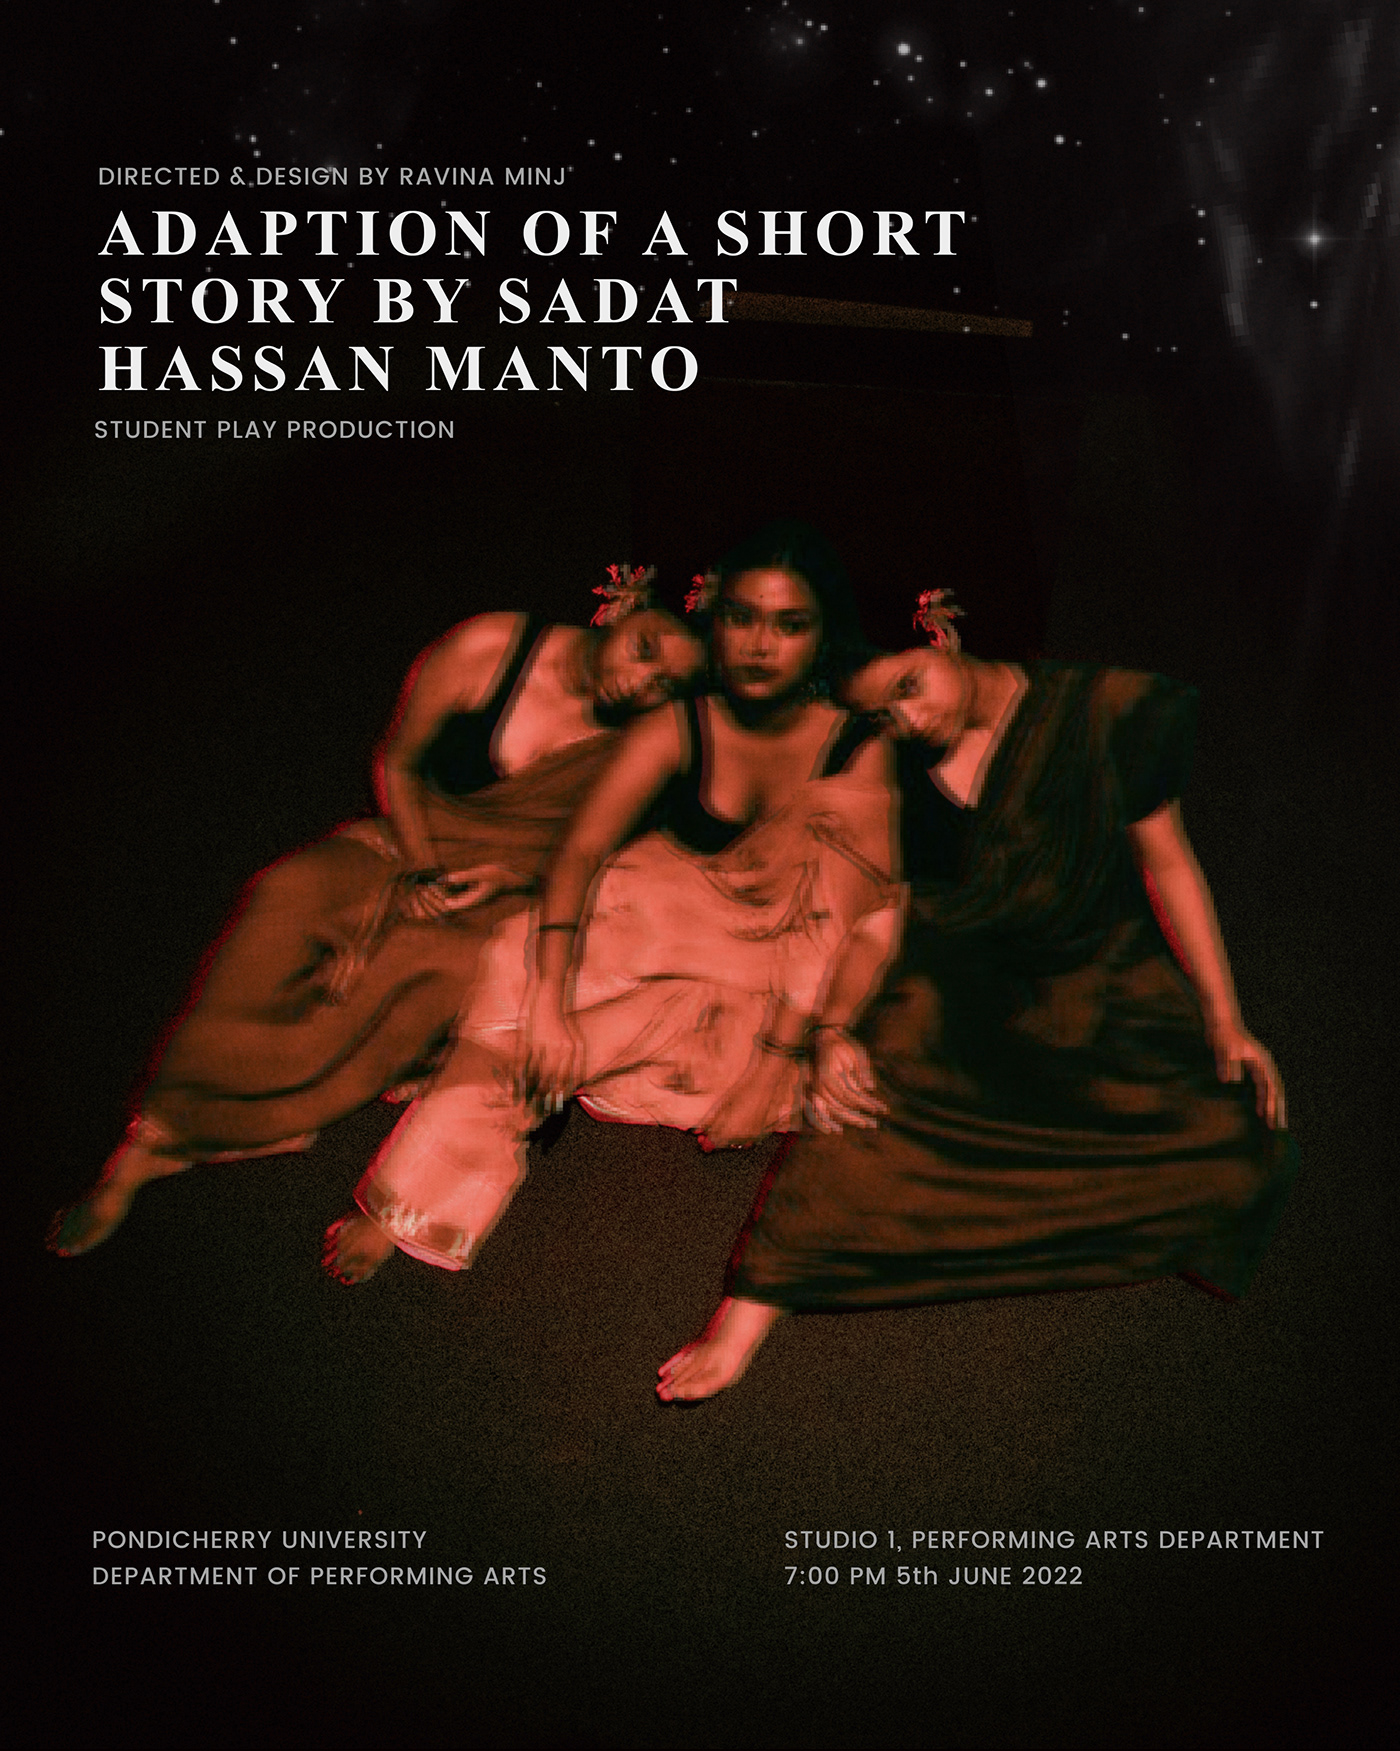 poster Poster Design design text Photography  movie poster Manto Theatre Cinema theatre poster